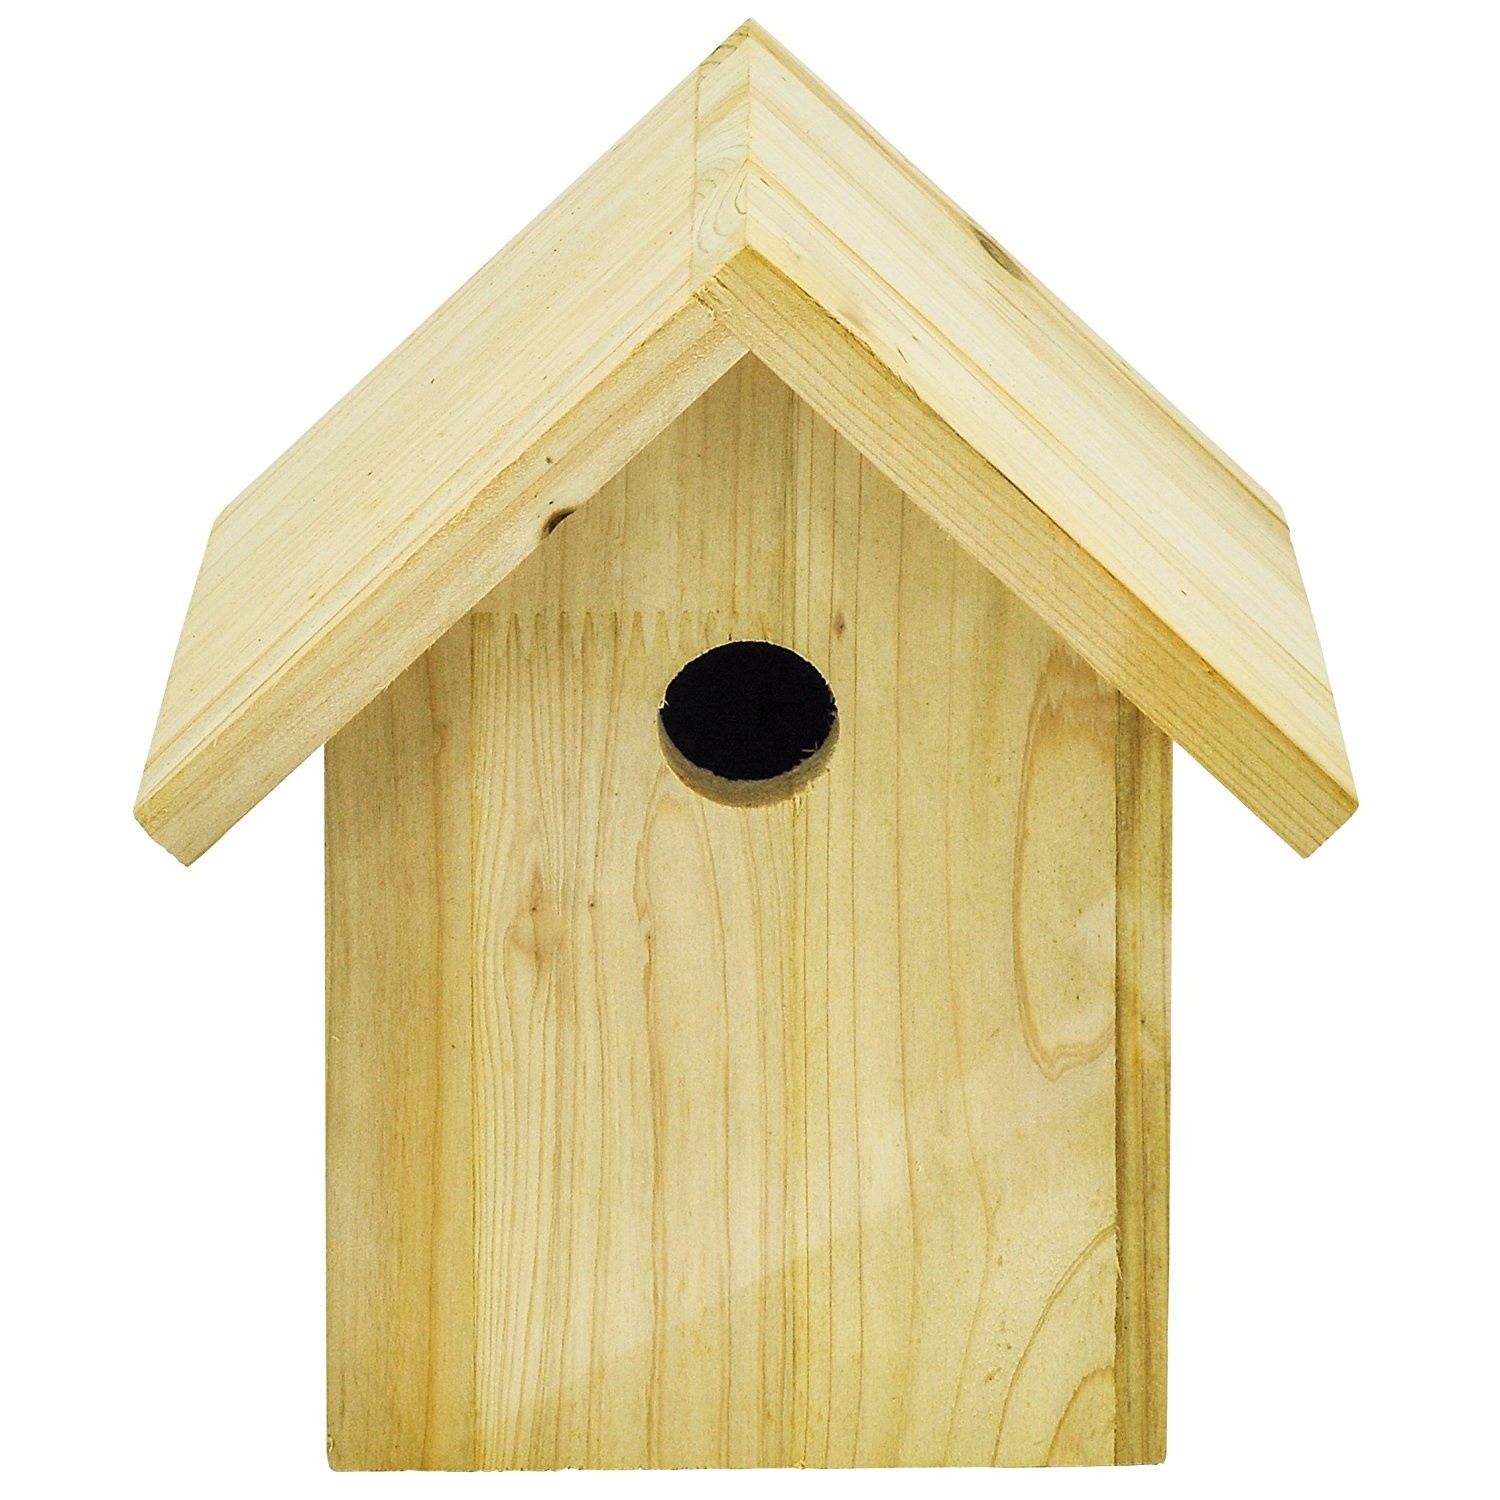 Custom nade exquisite chinese wooden bird house,DIY unfinished wooden bird houses decor outdoor